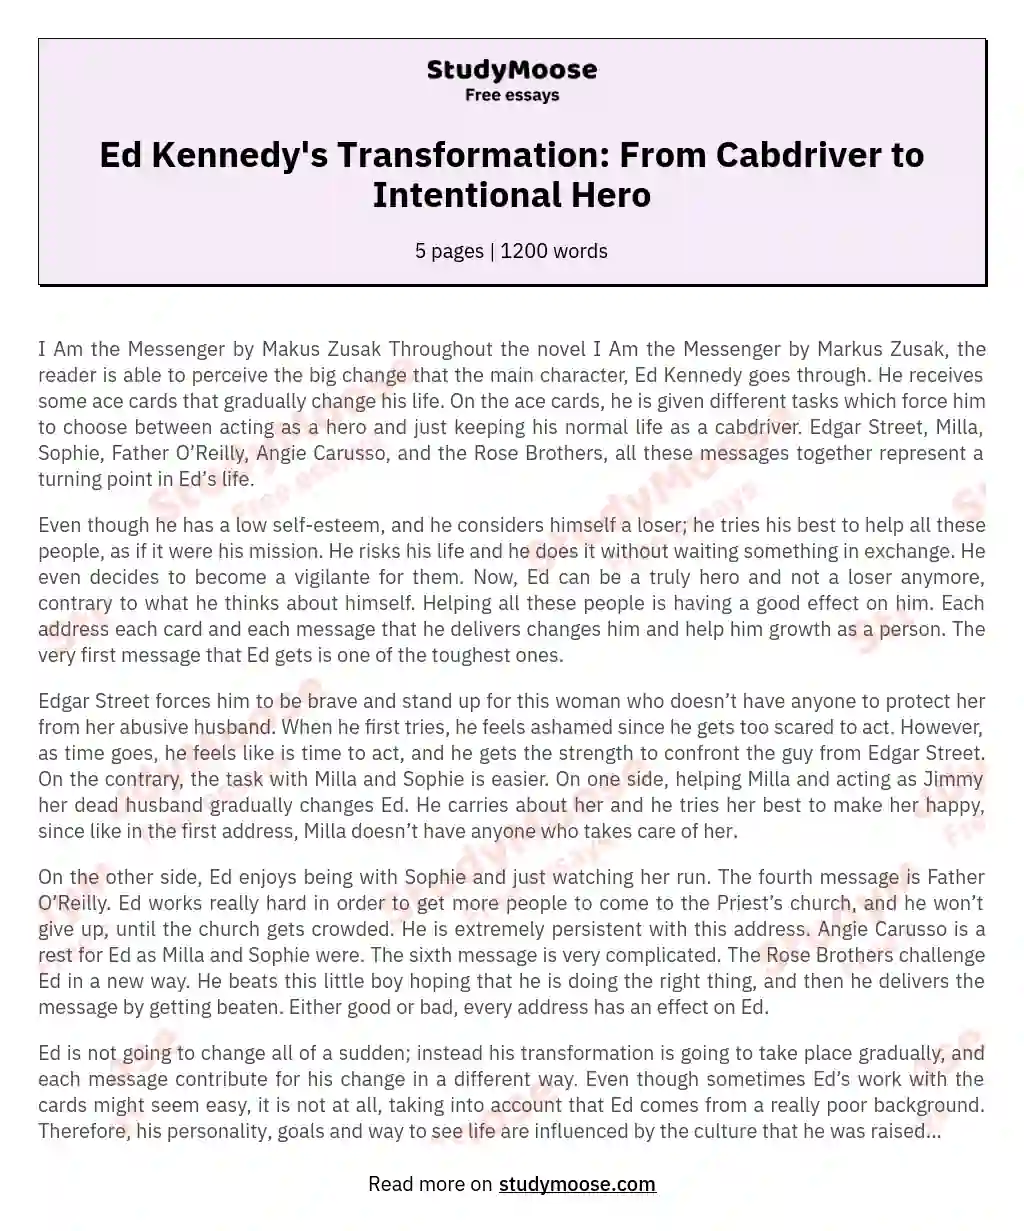 Ed Kennedy's Transformation: From Cabdriver to Intentional Hero essay